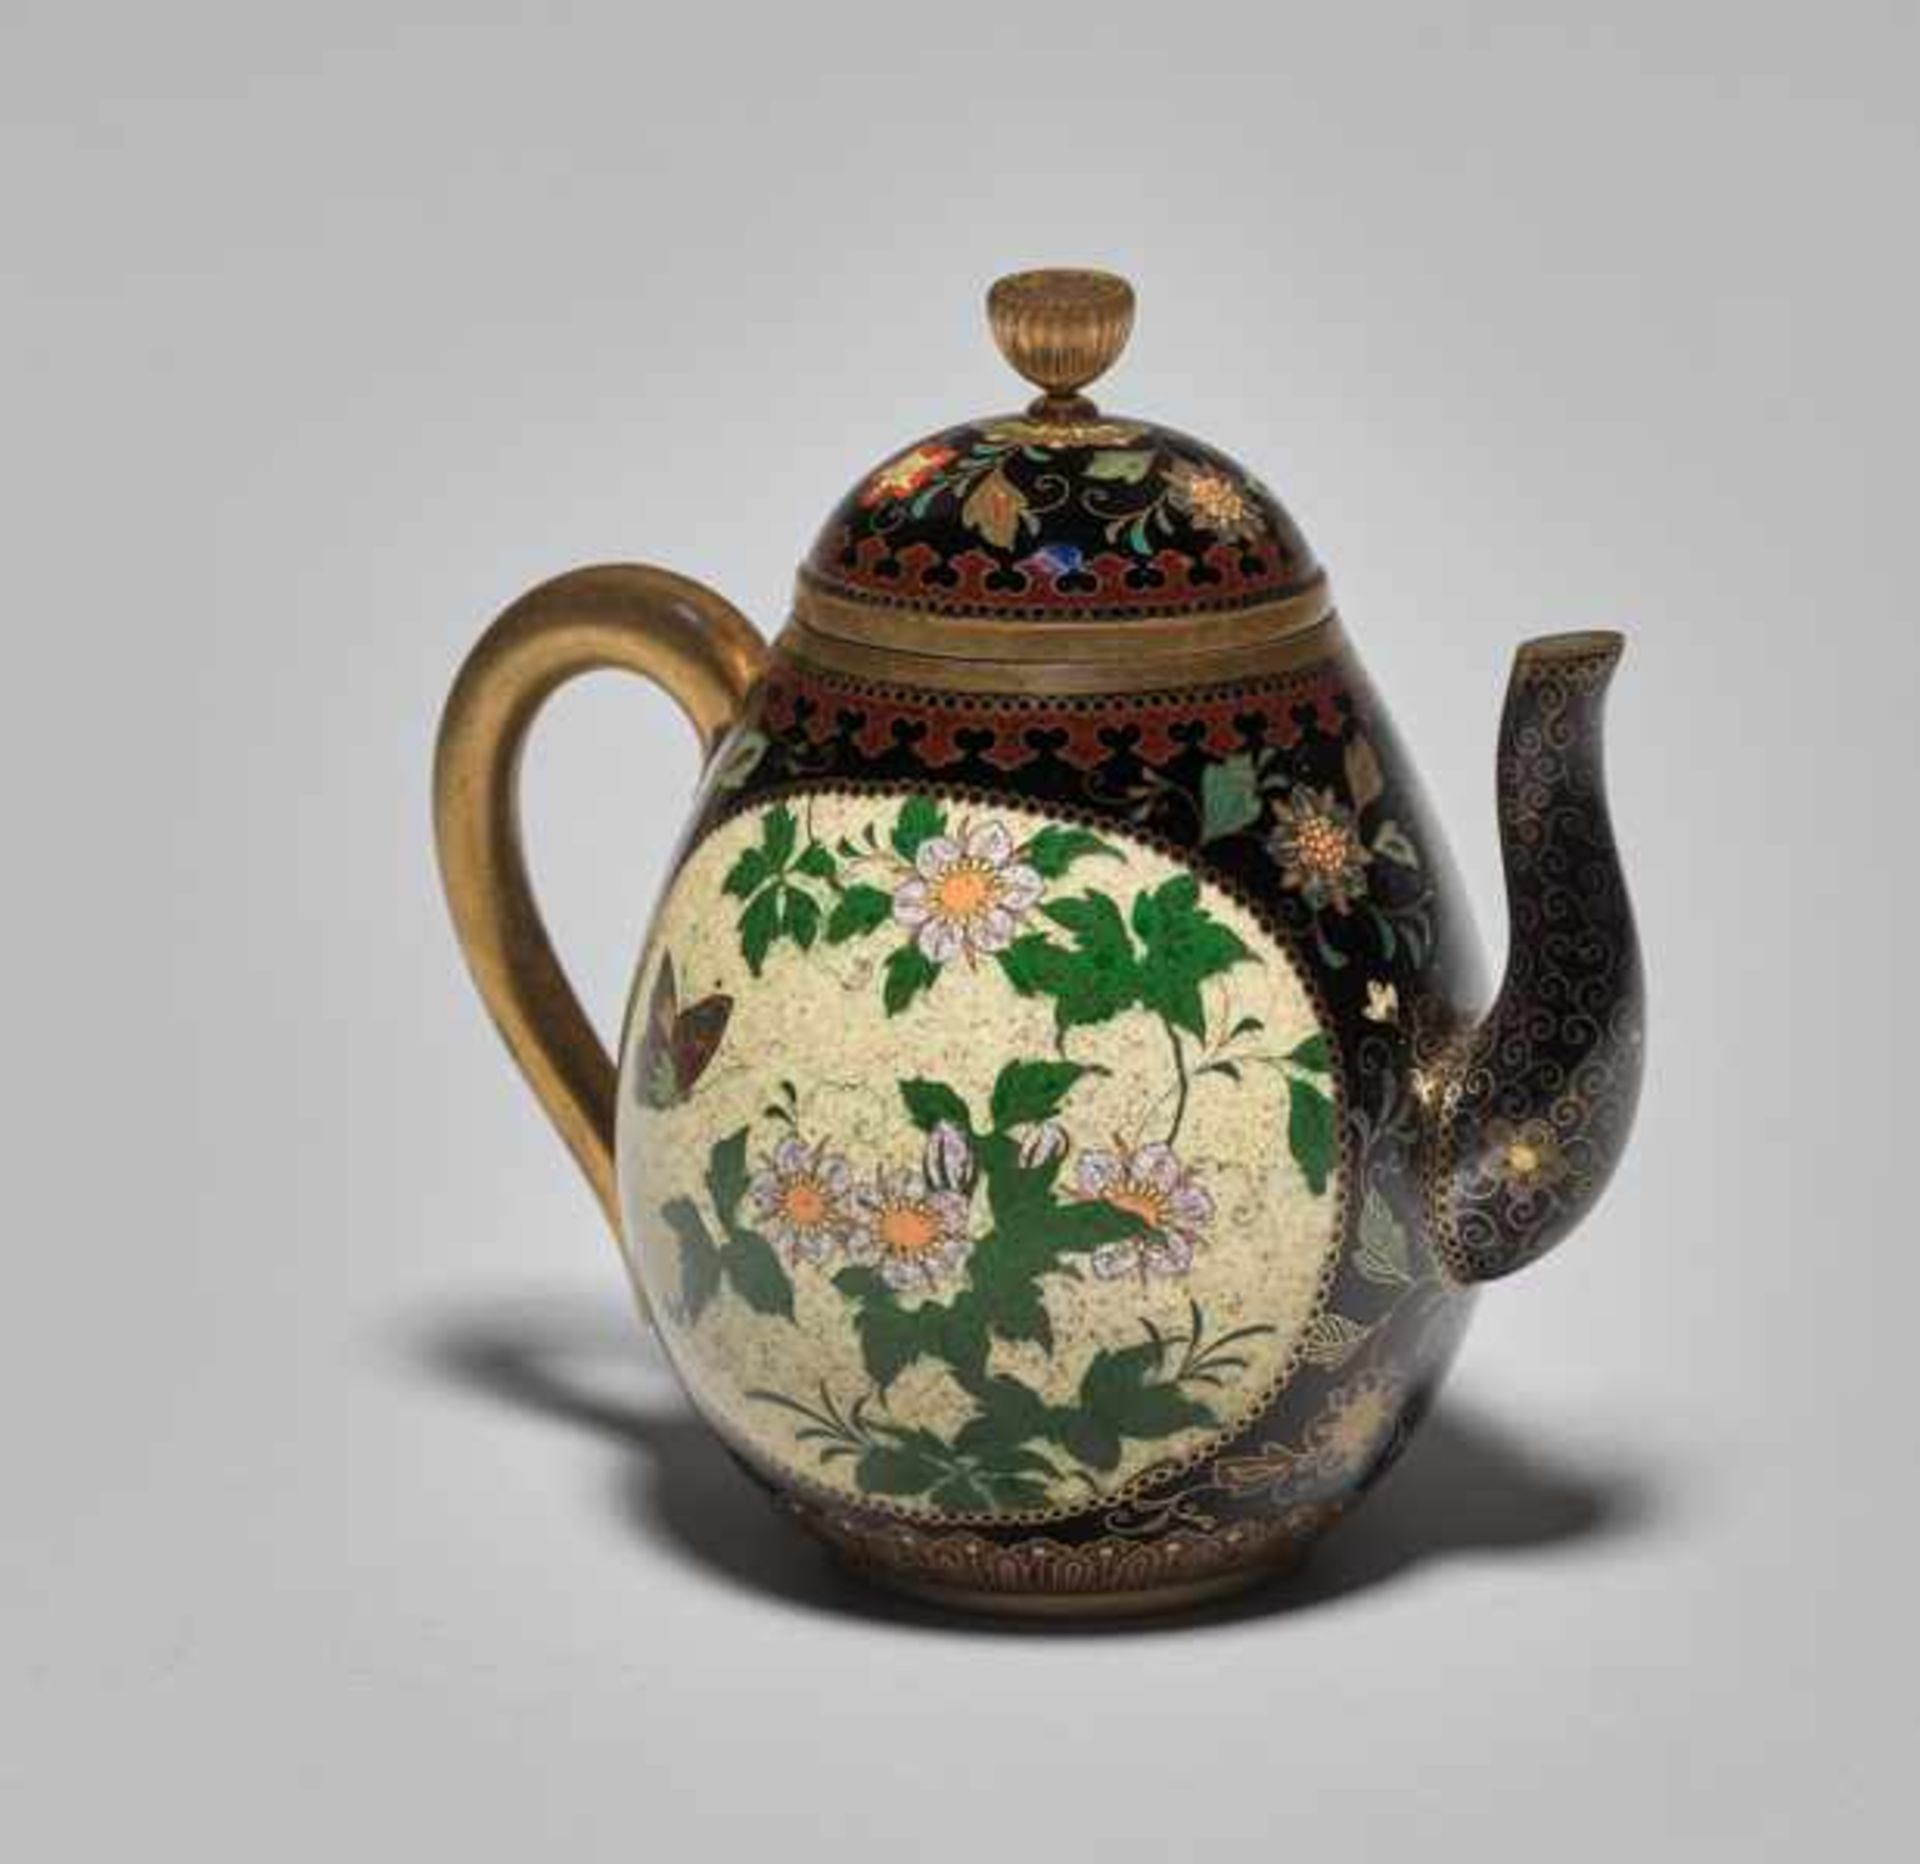 A CLOISONNÉ POT WITH SPOUT AND HANDLE ATTRIBUTED TO NAMIKAWA YASUYUKI (1845-1927) Colored enamel - Image 6 of 6